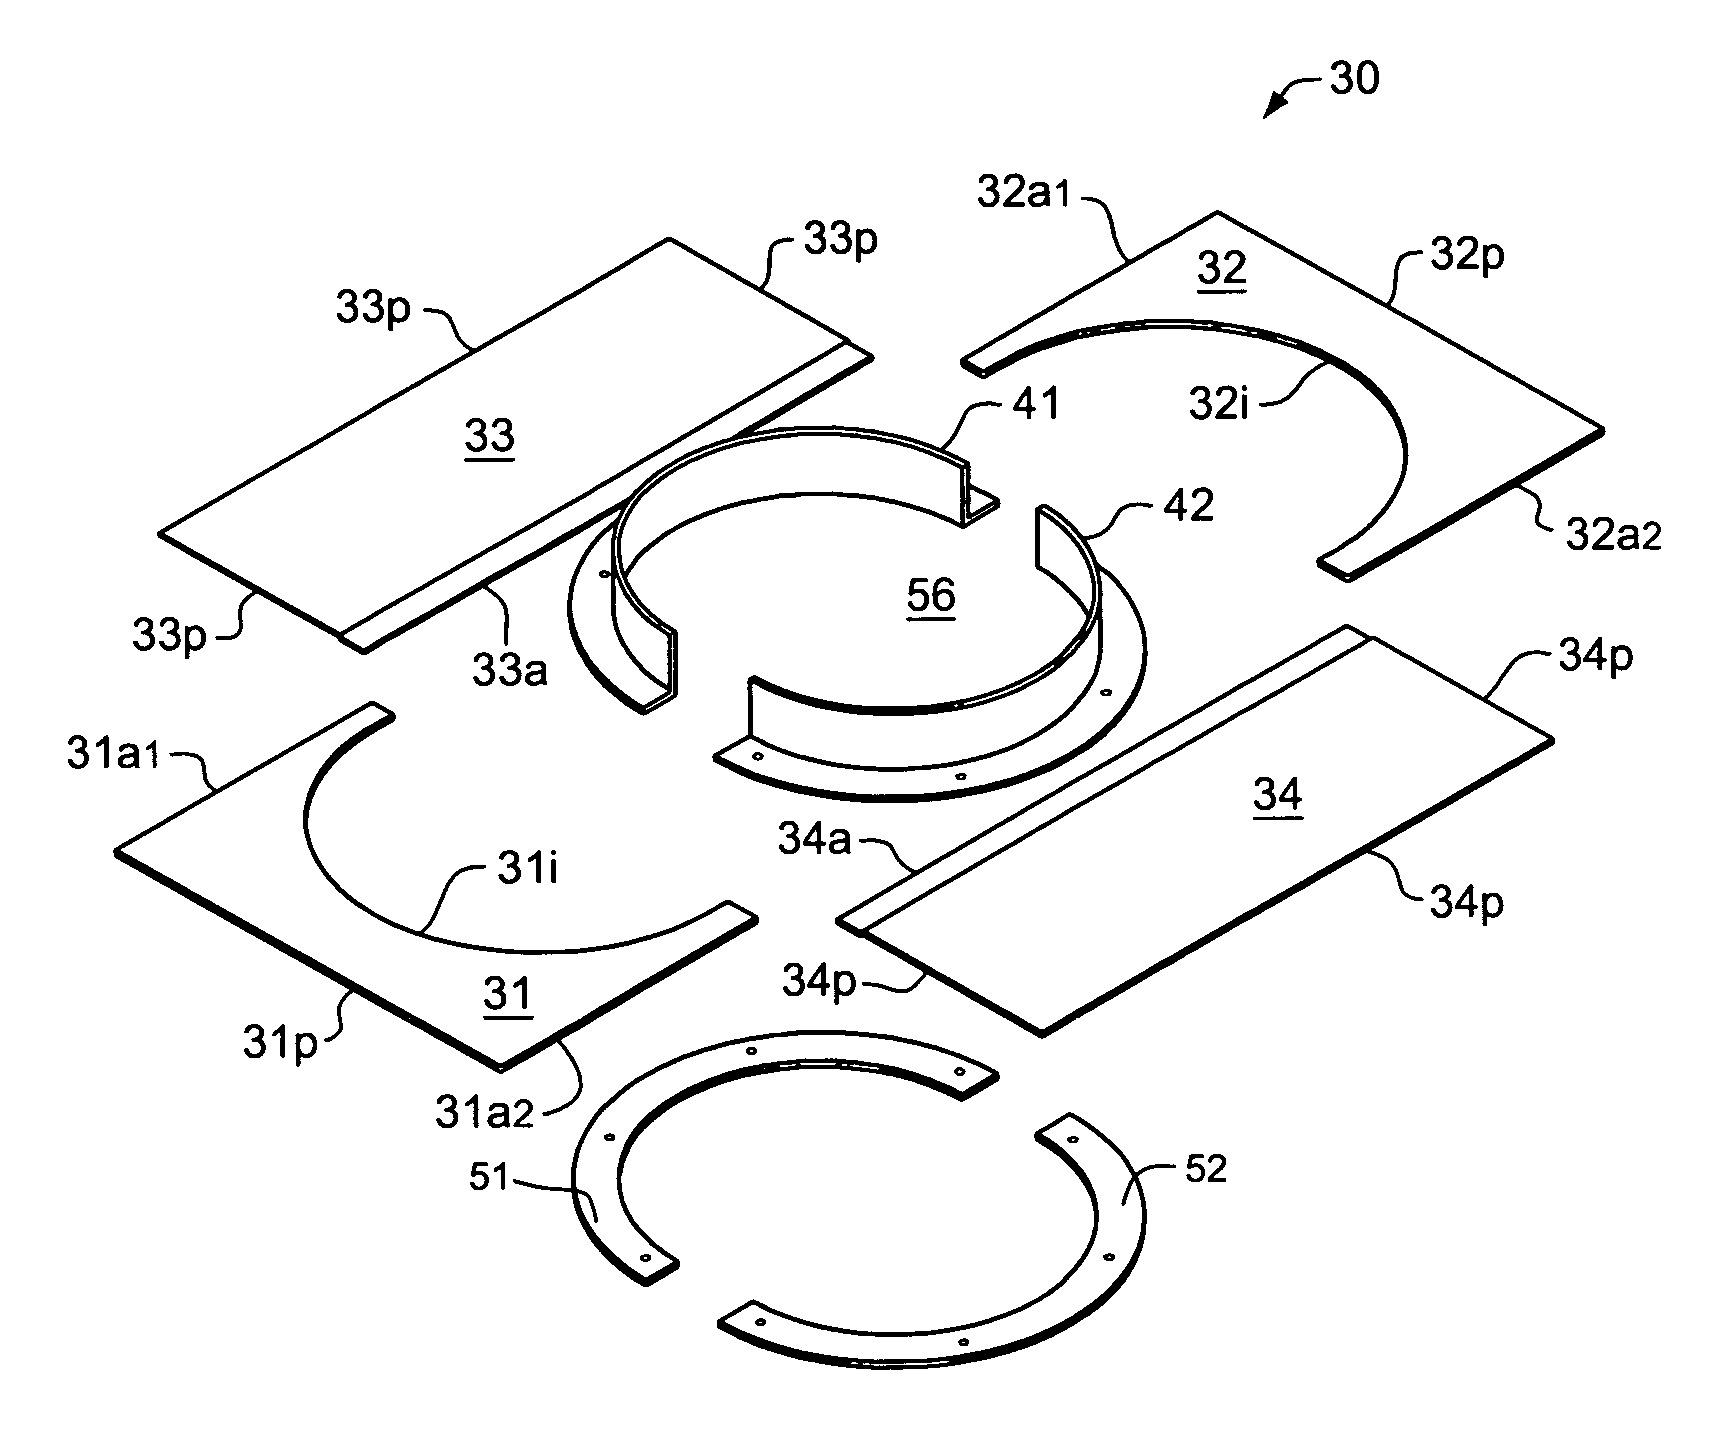 Segmented plate for assembly within a confined area having limited access